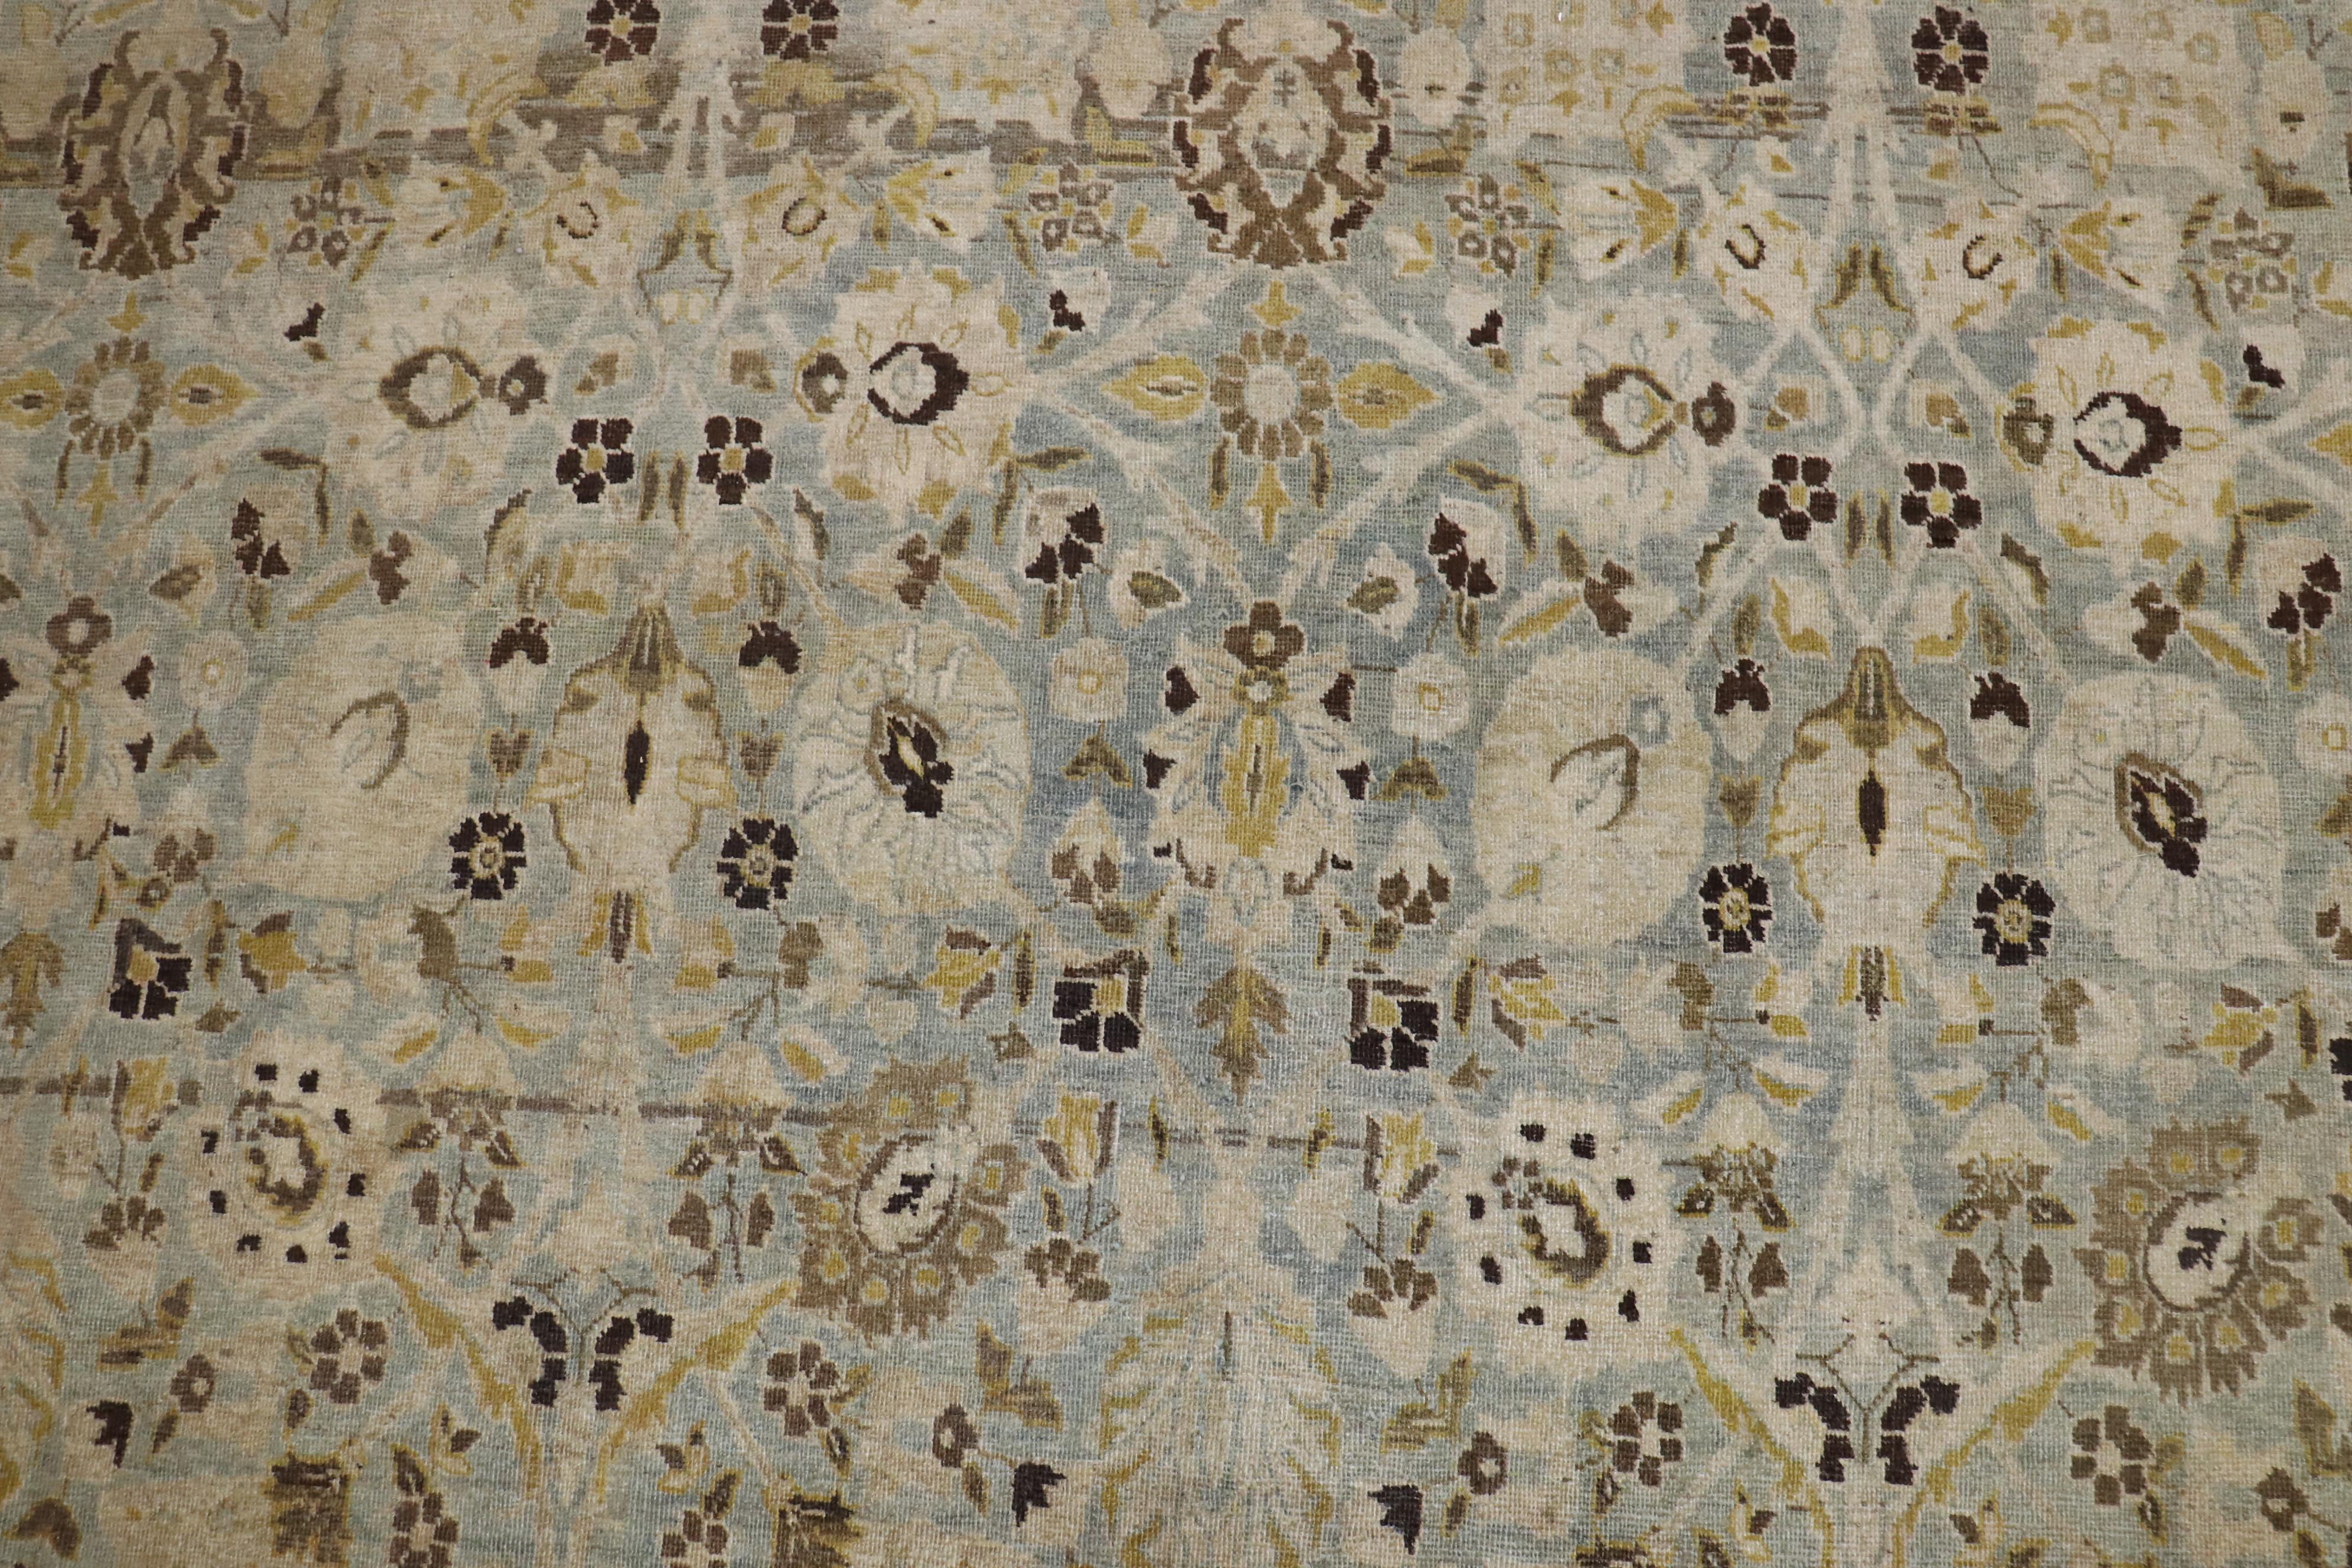 Hand-Woven Blue Gray Chartreuse Antique Persian Tabriz Carpet, Early 20th Century For Sale